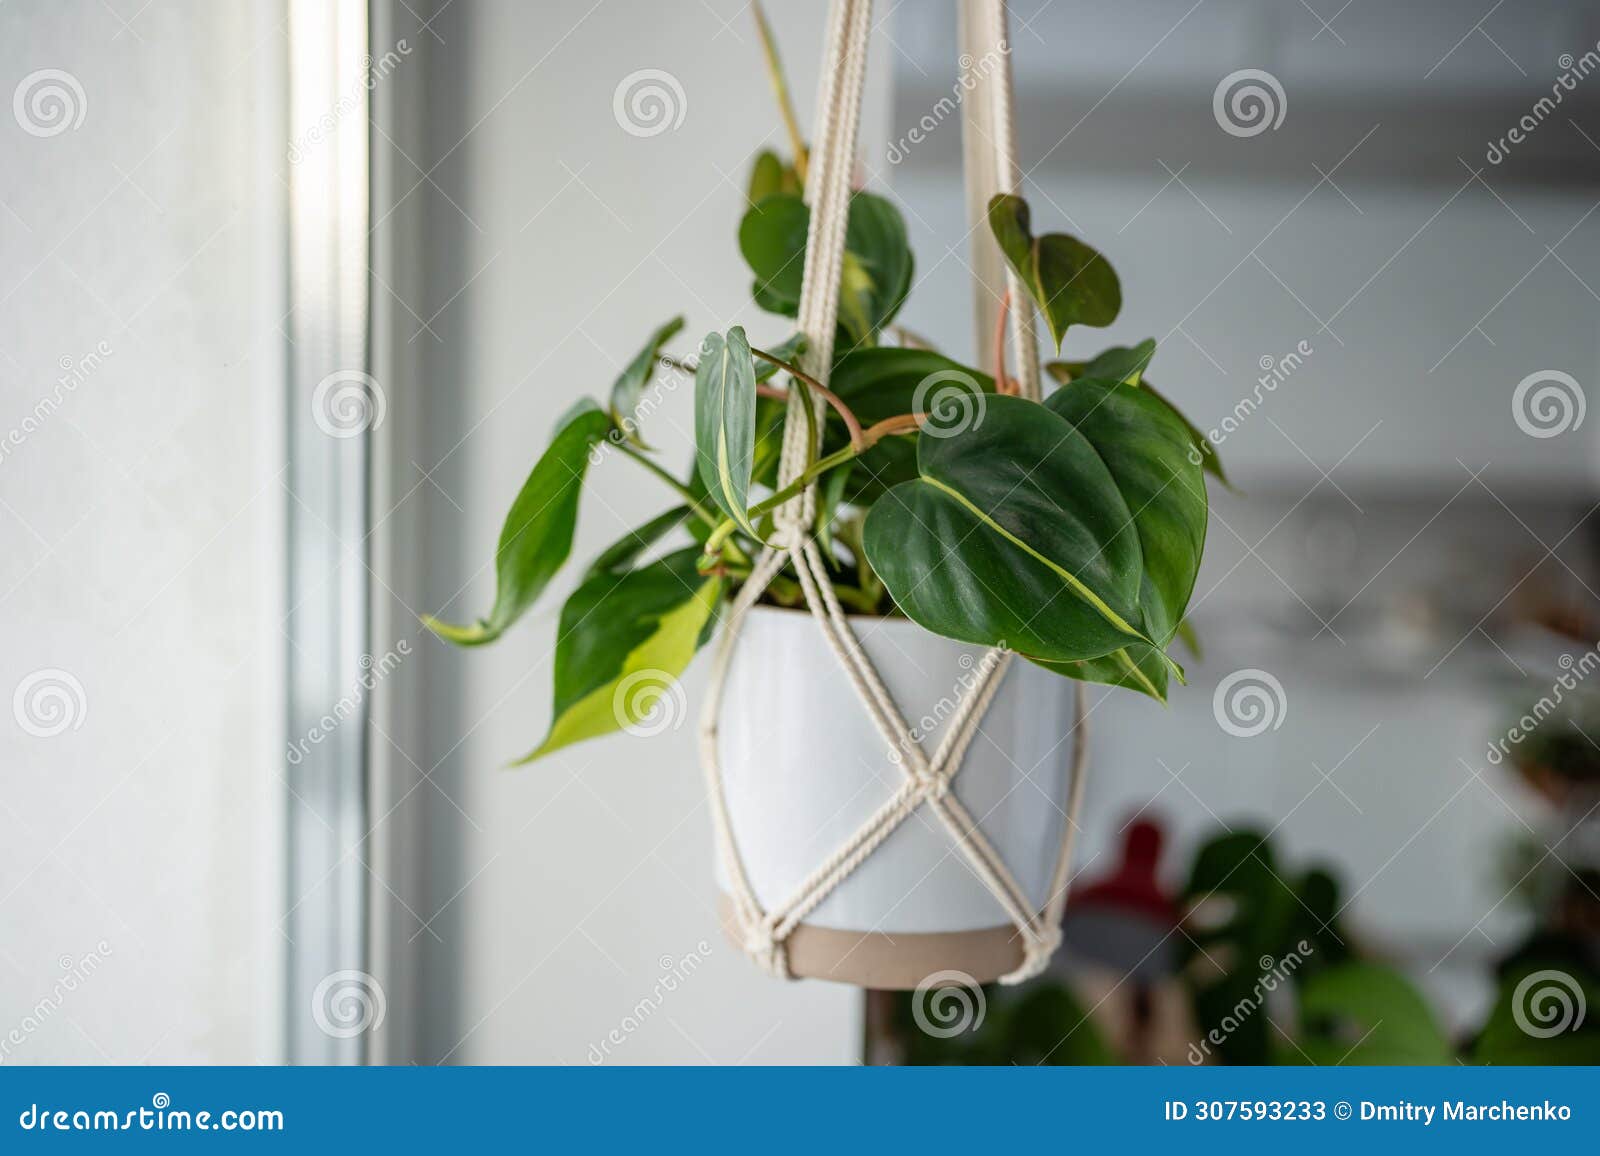 plant philodendron hederaceum brasil in ceramic pot hanging from cotton macrame at home.